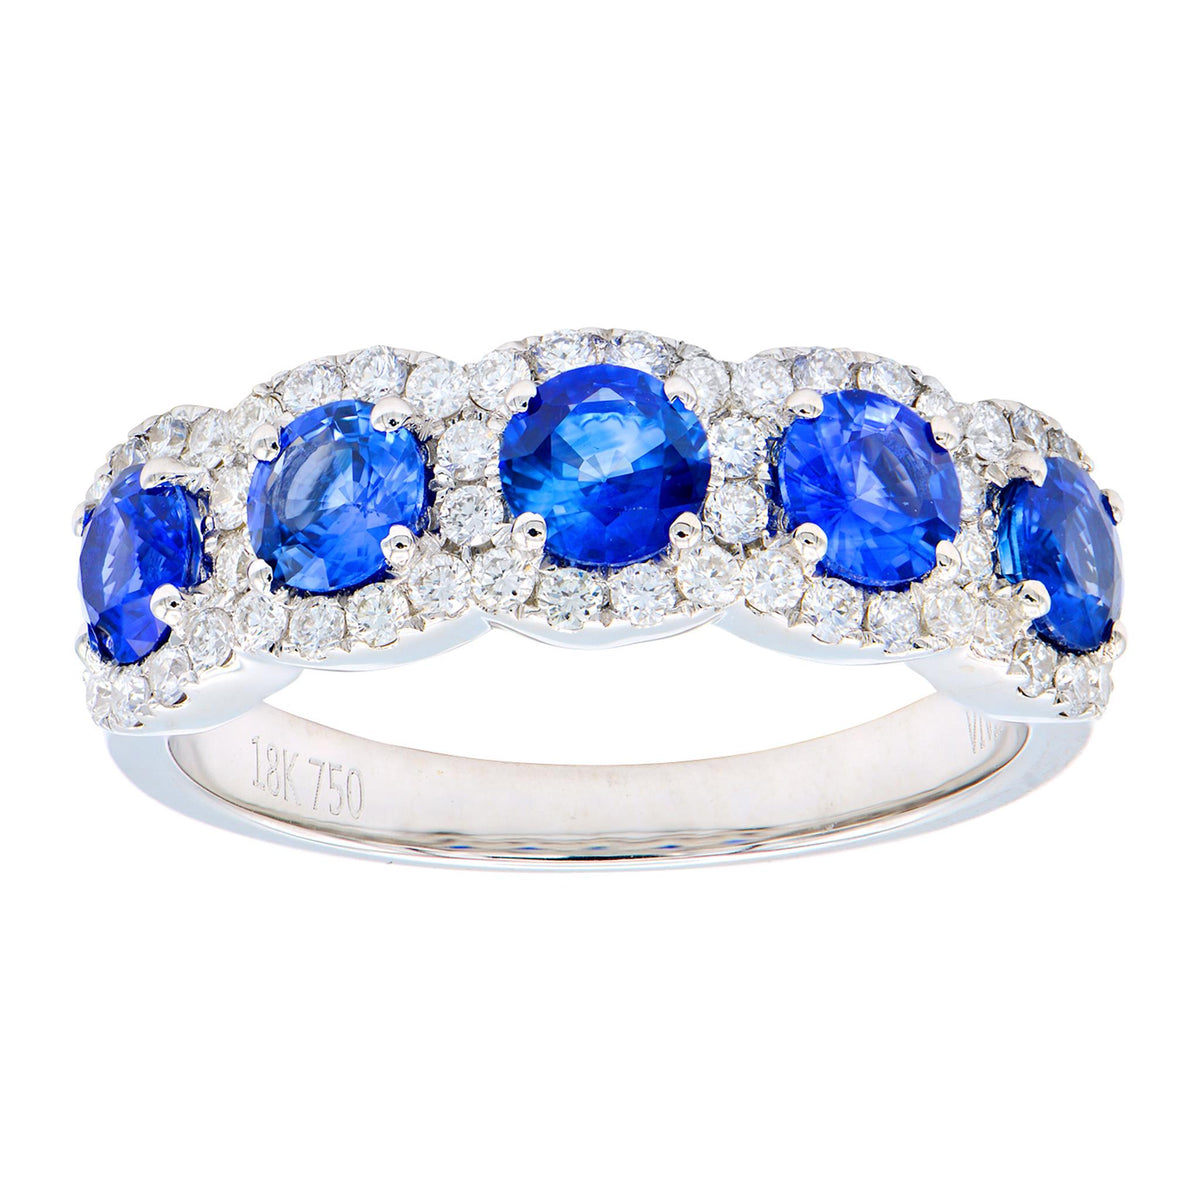 18K White Gold 5-Stone Blue Sapphire Diamond Halo Ring with 1.58ct Sapphires and .43cttw Natural Diamonds - Size 6.5